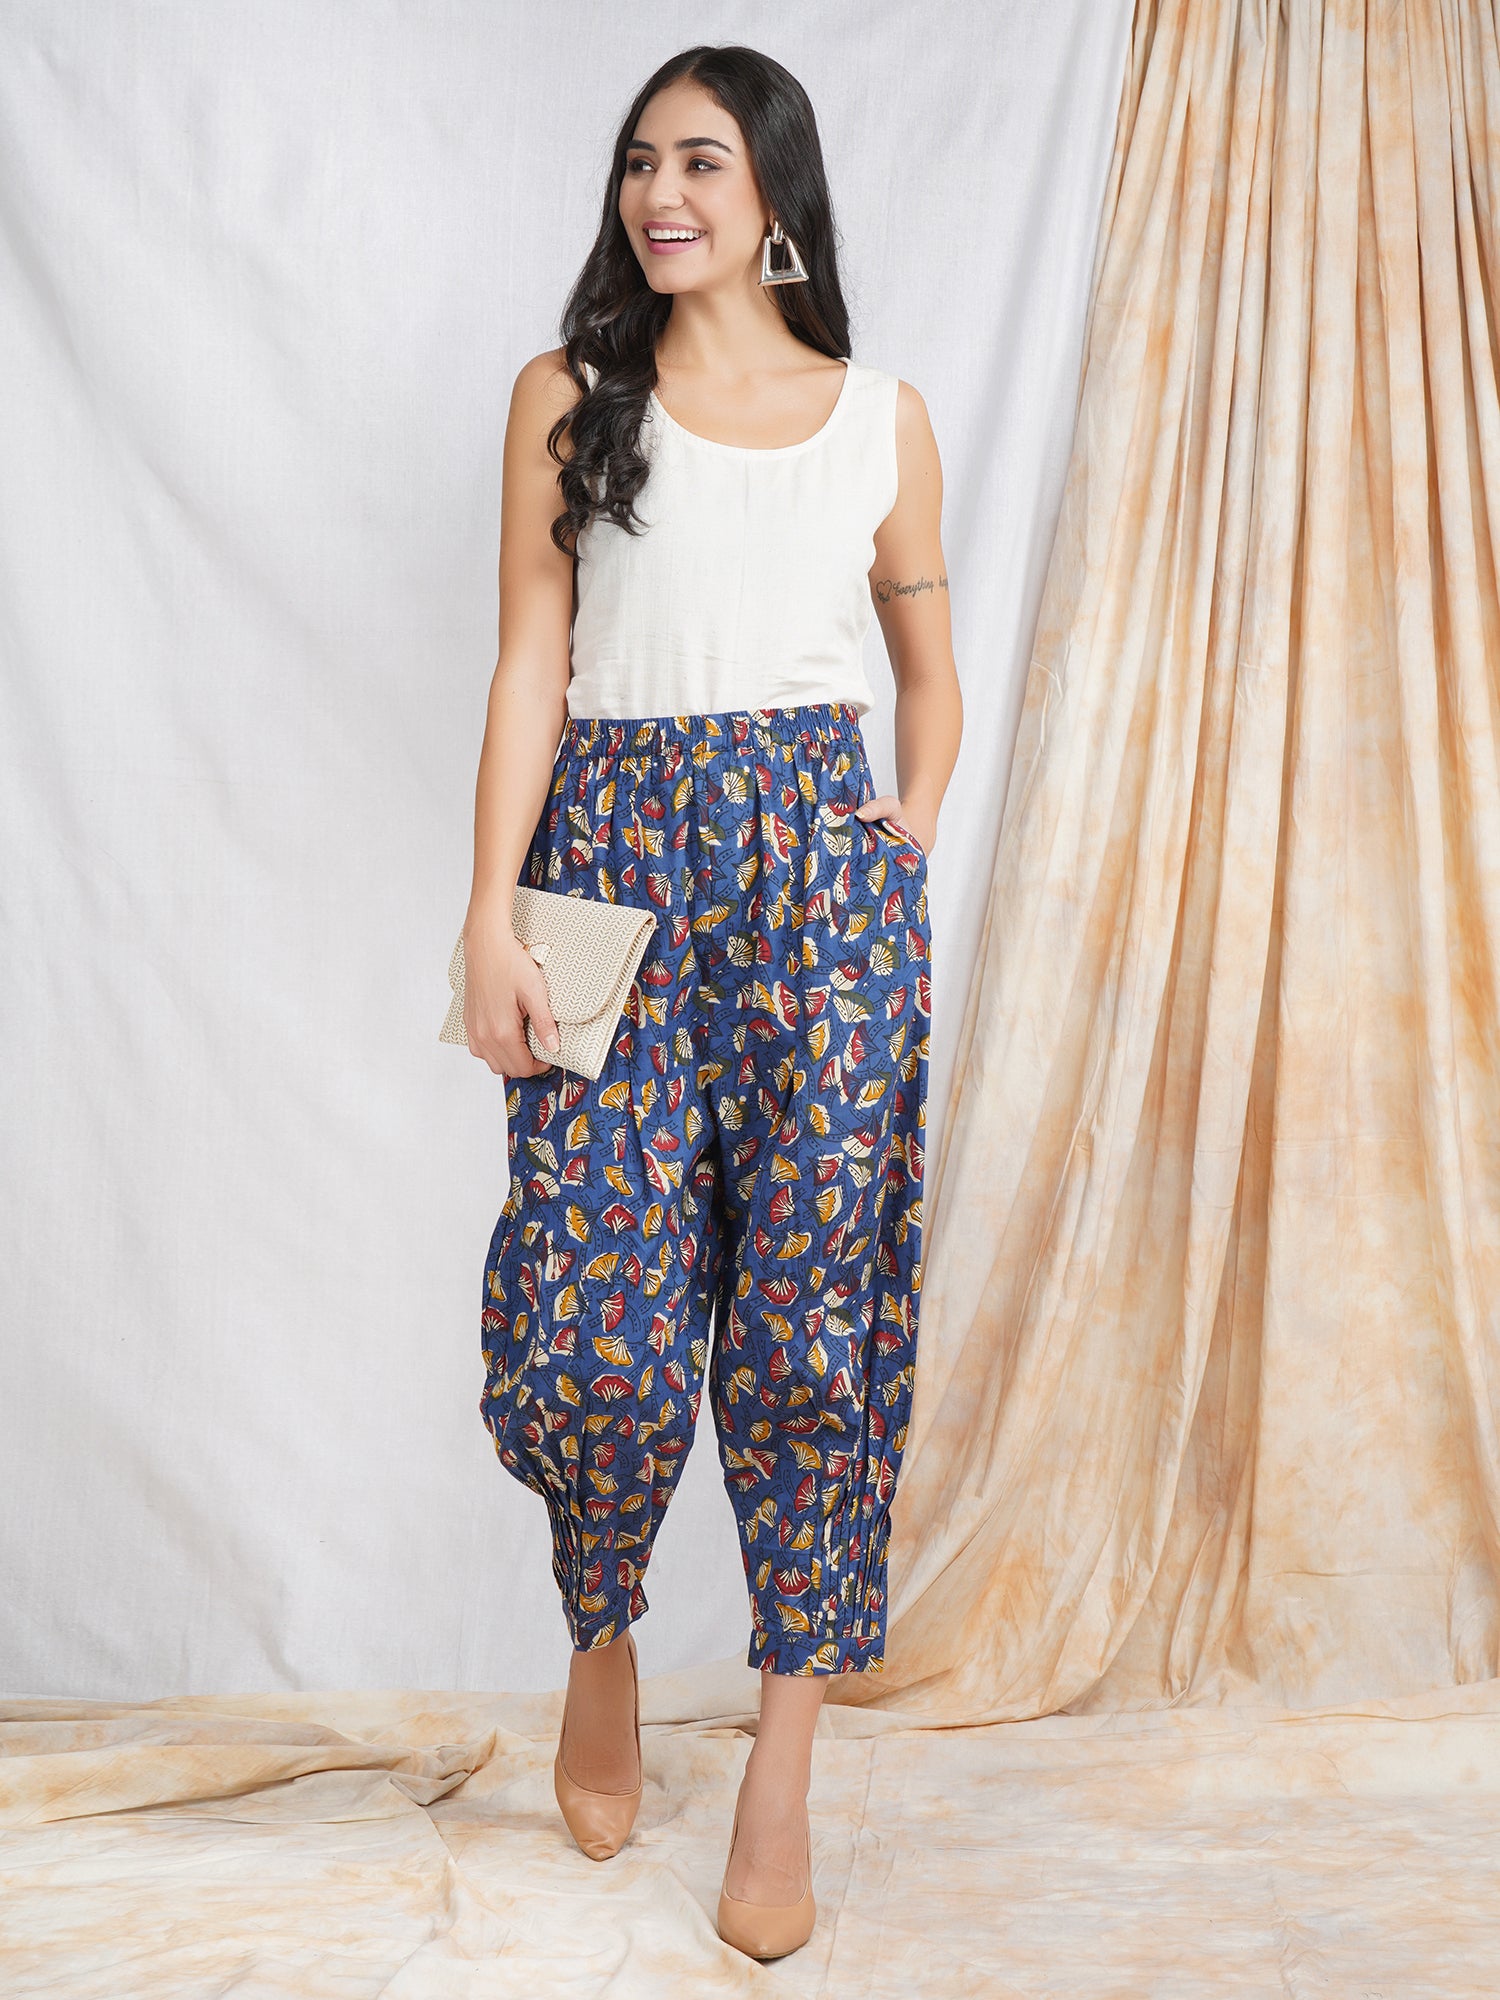 Fabindia - Cotton Mull Kalamkari Flared Palazzo Pant Rs. 1,290.00 Buy  Online: http://www.fabindia.com/clothes-for-women/womens-pants -and-capris/cotton-mull-kalamkari-flared-palazzo-pant-23734.html | Facebook